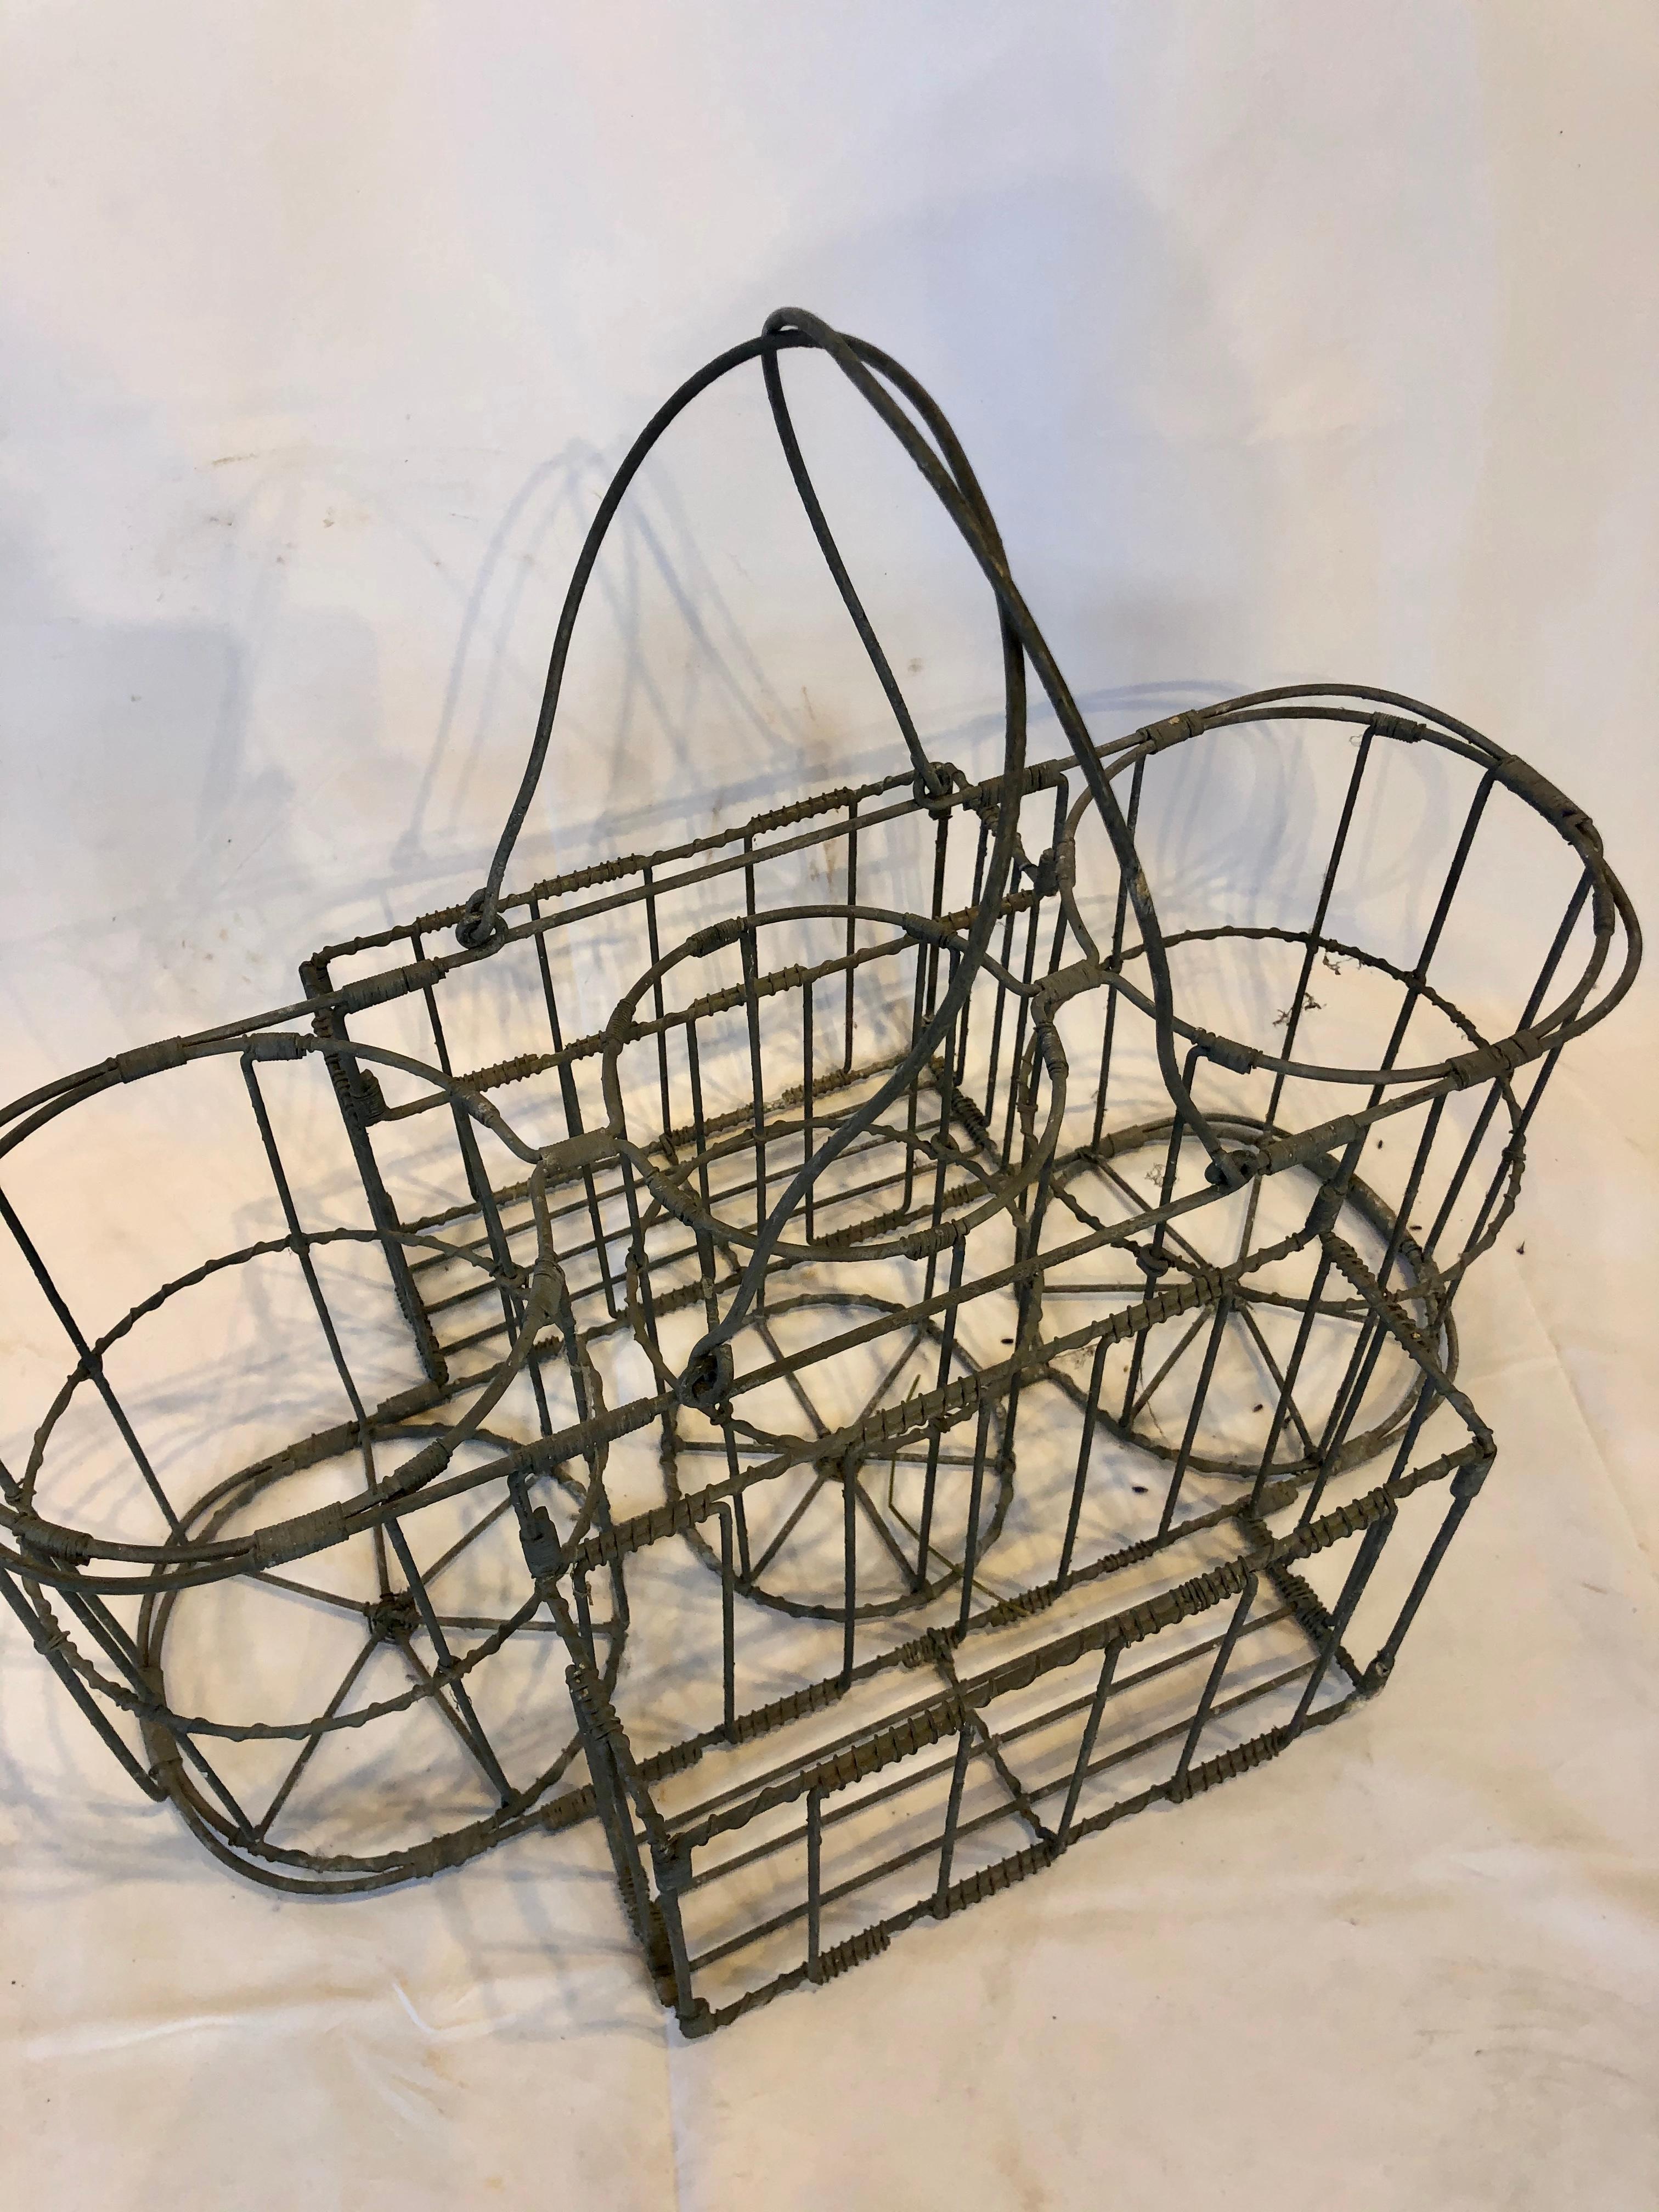 This is a unique early 20th century French bottle carrier basket. Made of metal, the carrier can hold three large bottles and has two side spaces for other items. We believe this carrier was used to transport items for delivery to a home or wine